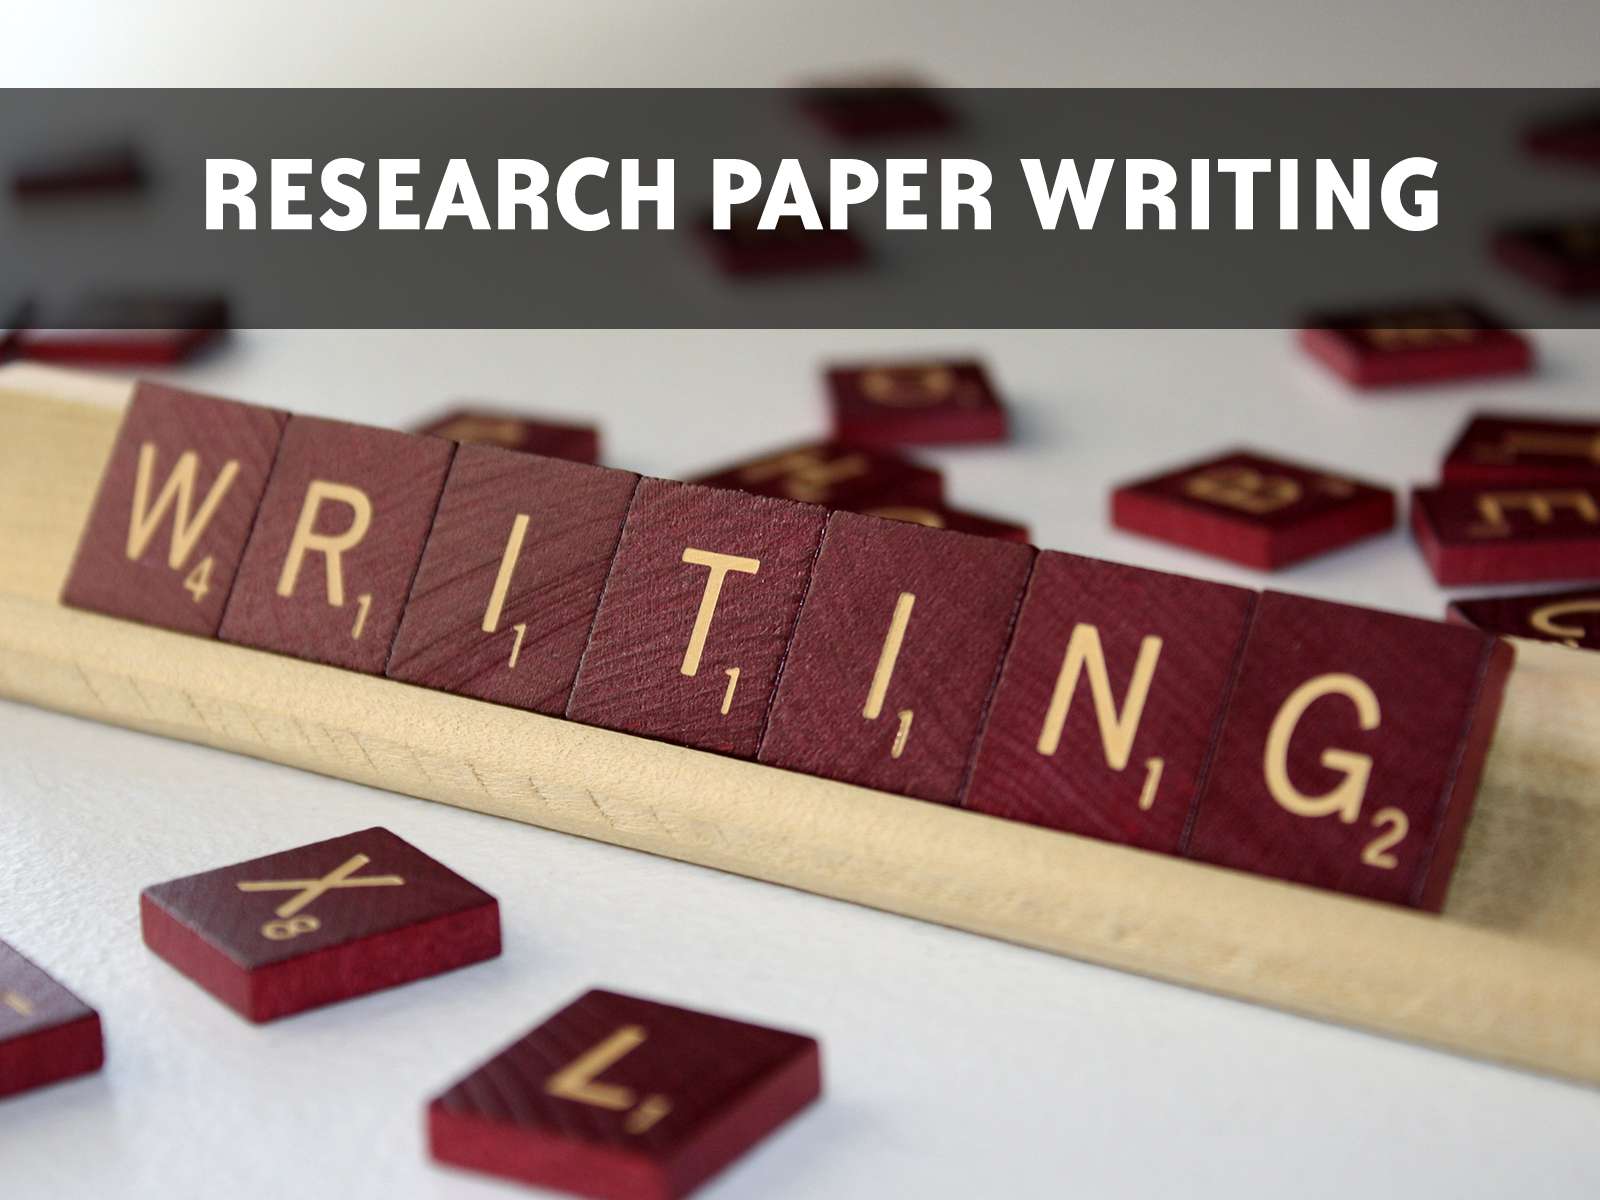 research and writing careers